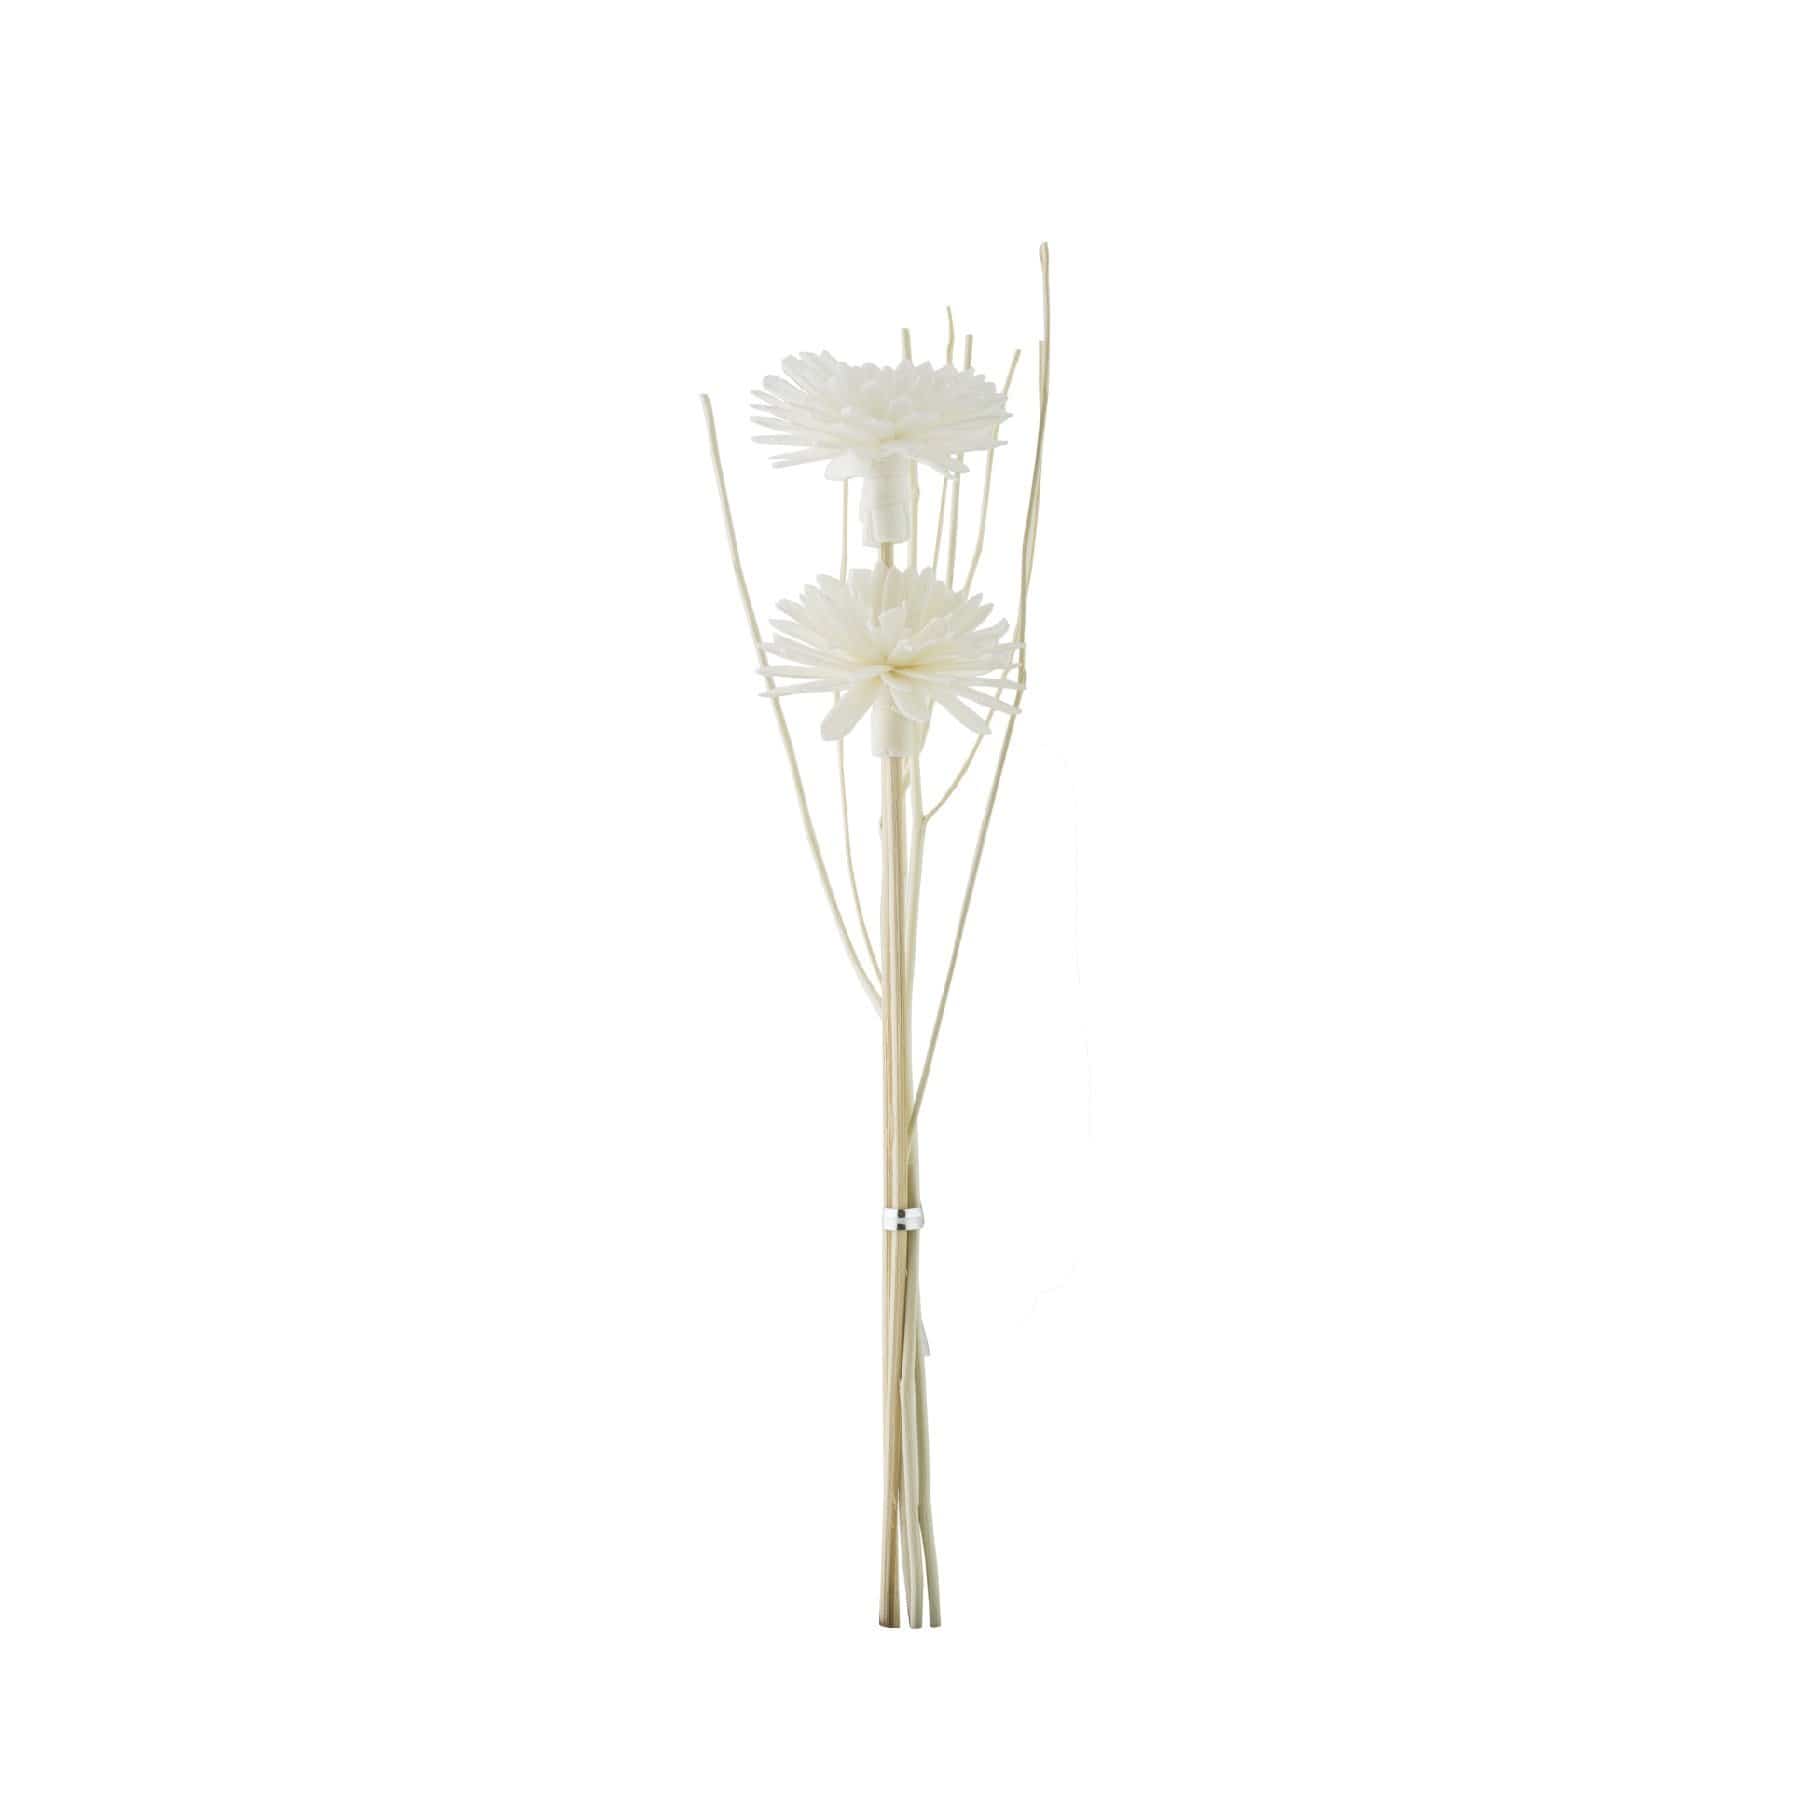 HYSSES Home Scents Solar Flower Diffuser Refill - Daisy Bouquet